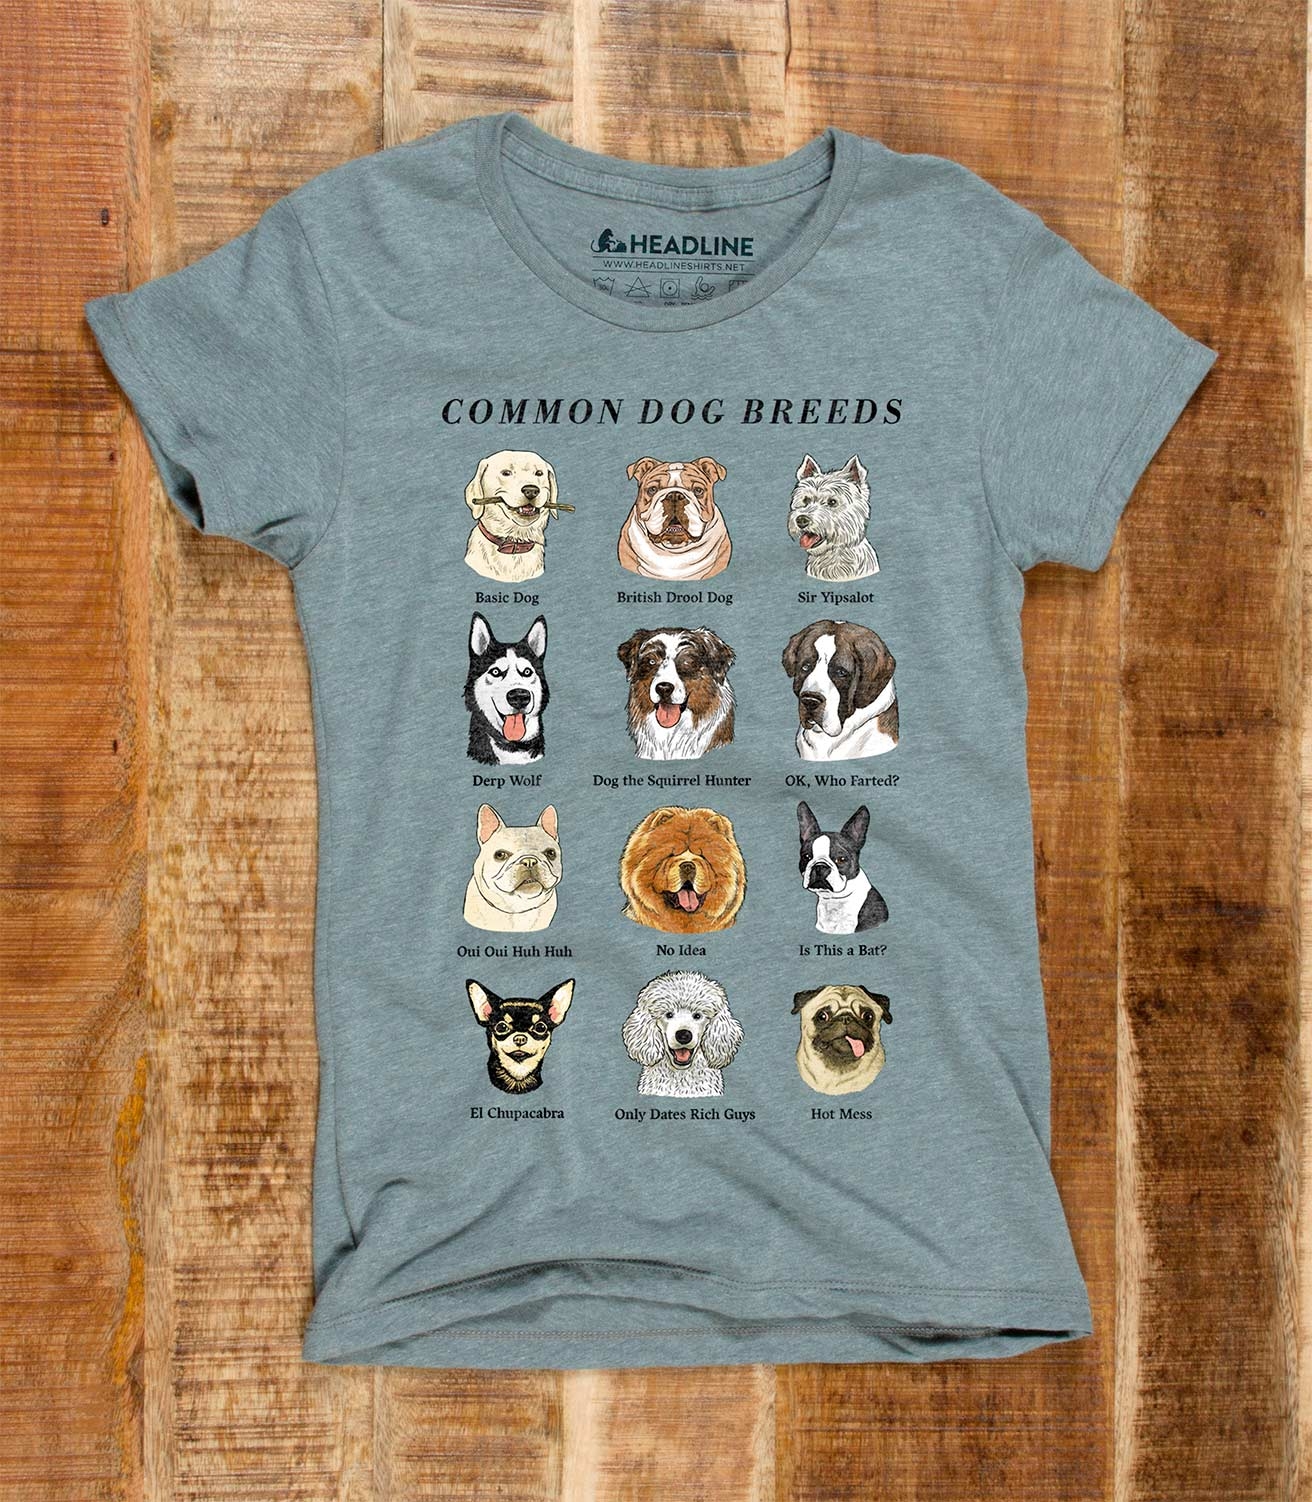 Common Dog Breeds Funny Women's Cotton 